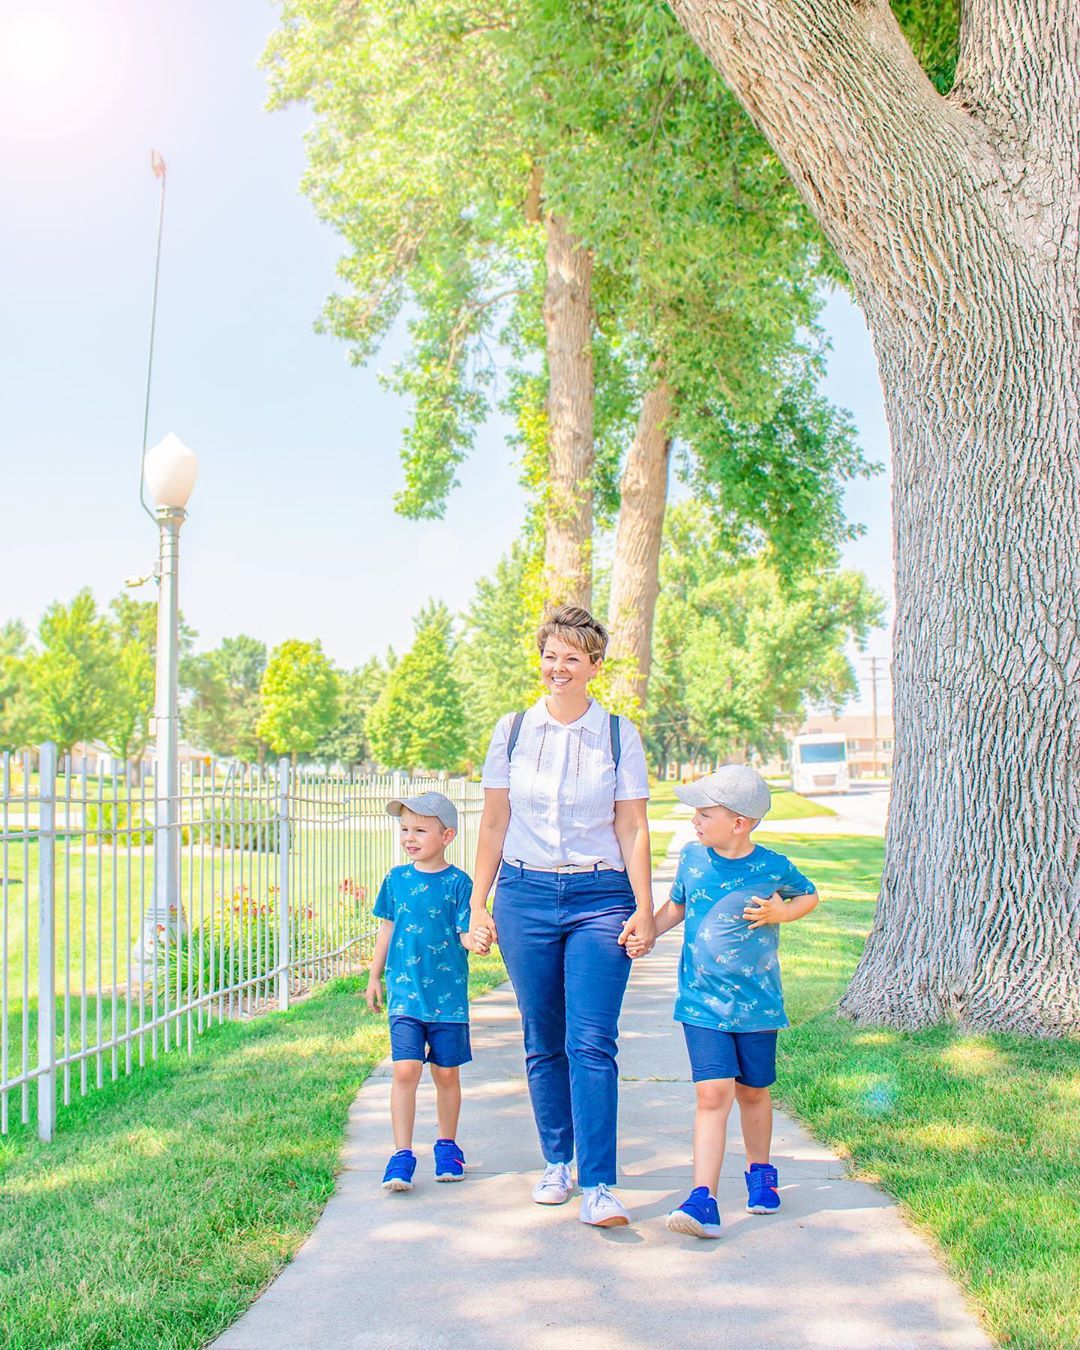 Mom and sons walking through neighborhood. Photo by Instagram user @itsnicandjess